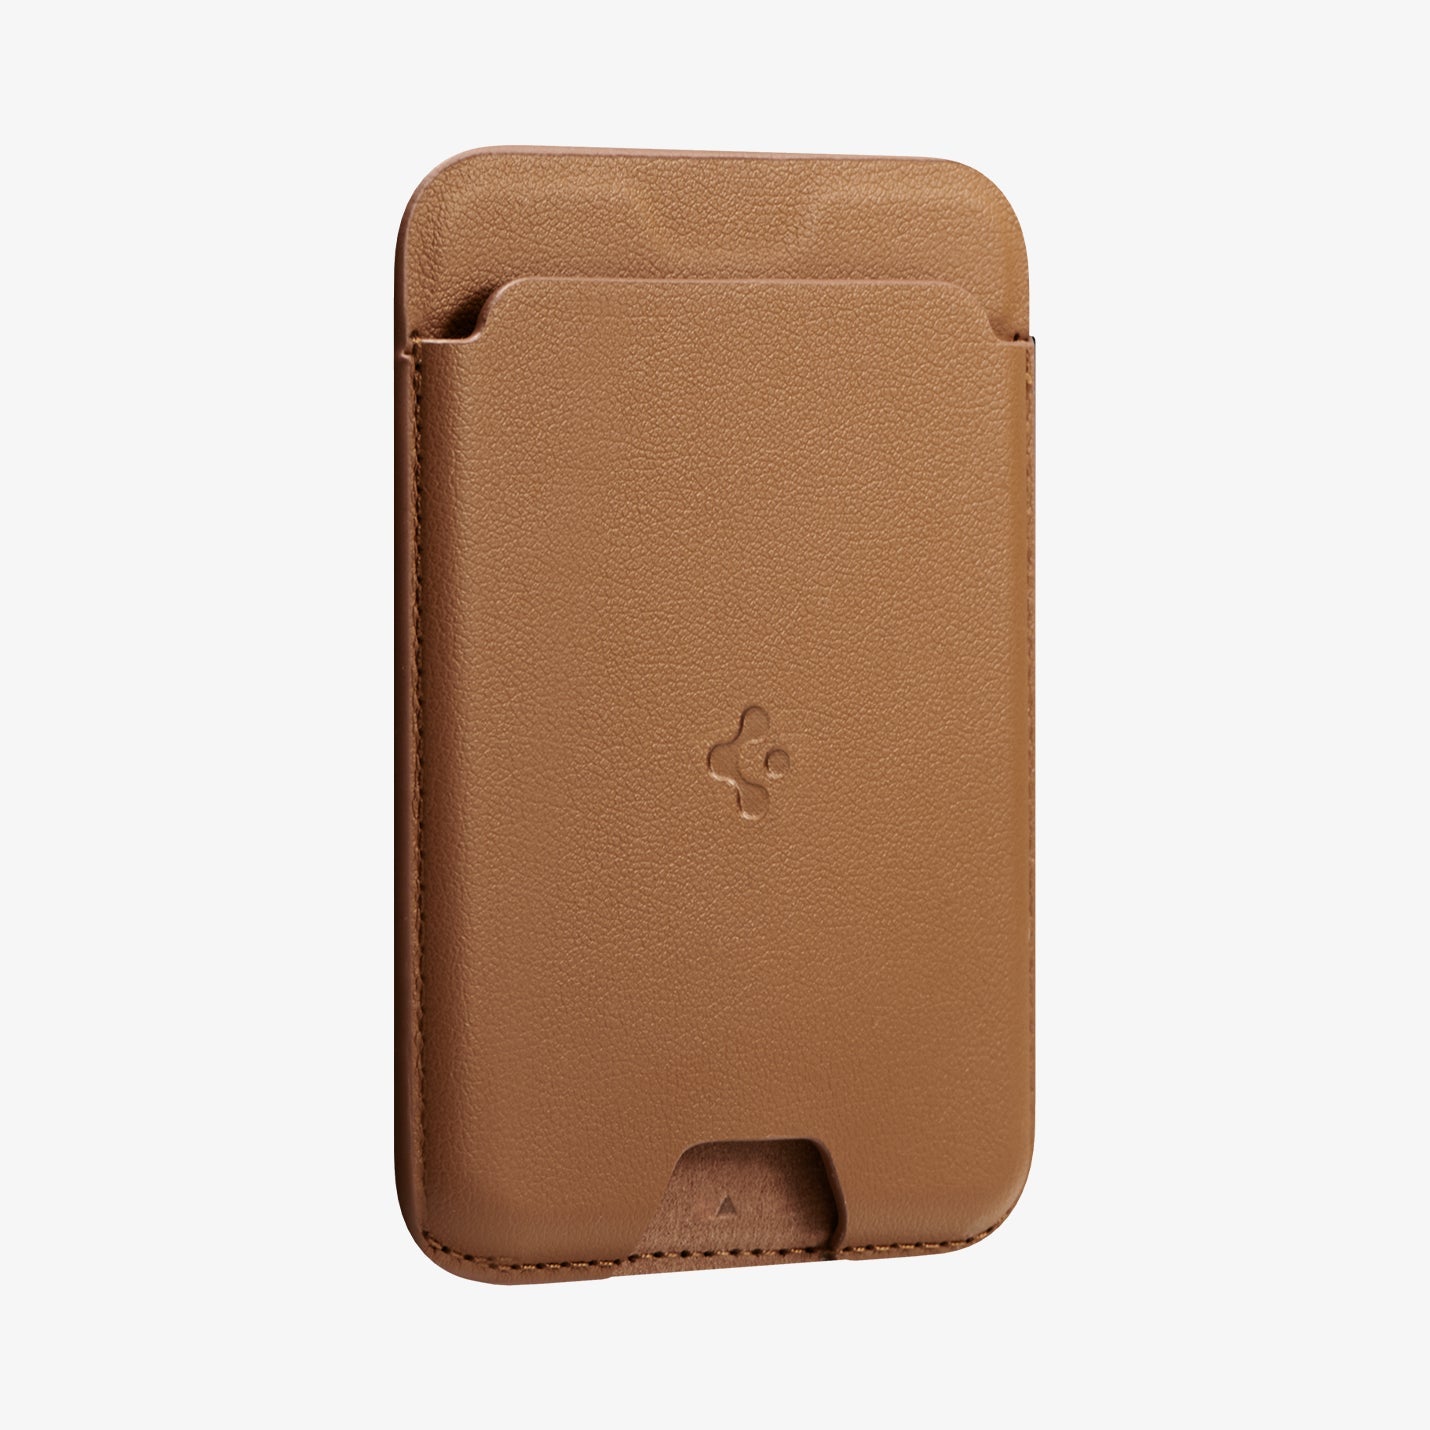 AFA05804 - MagSafe 3 Cards Holder Valentinus (MagFit) in brown showing the front and side